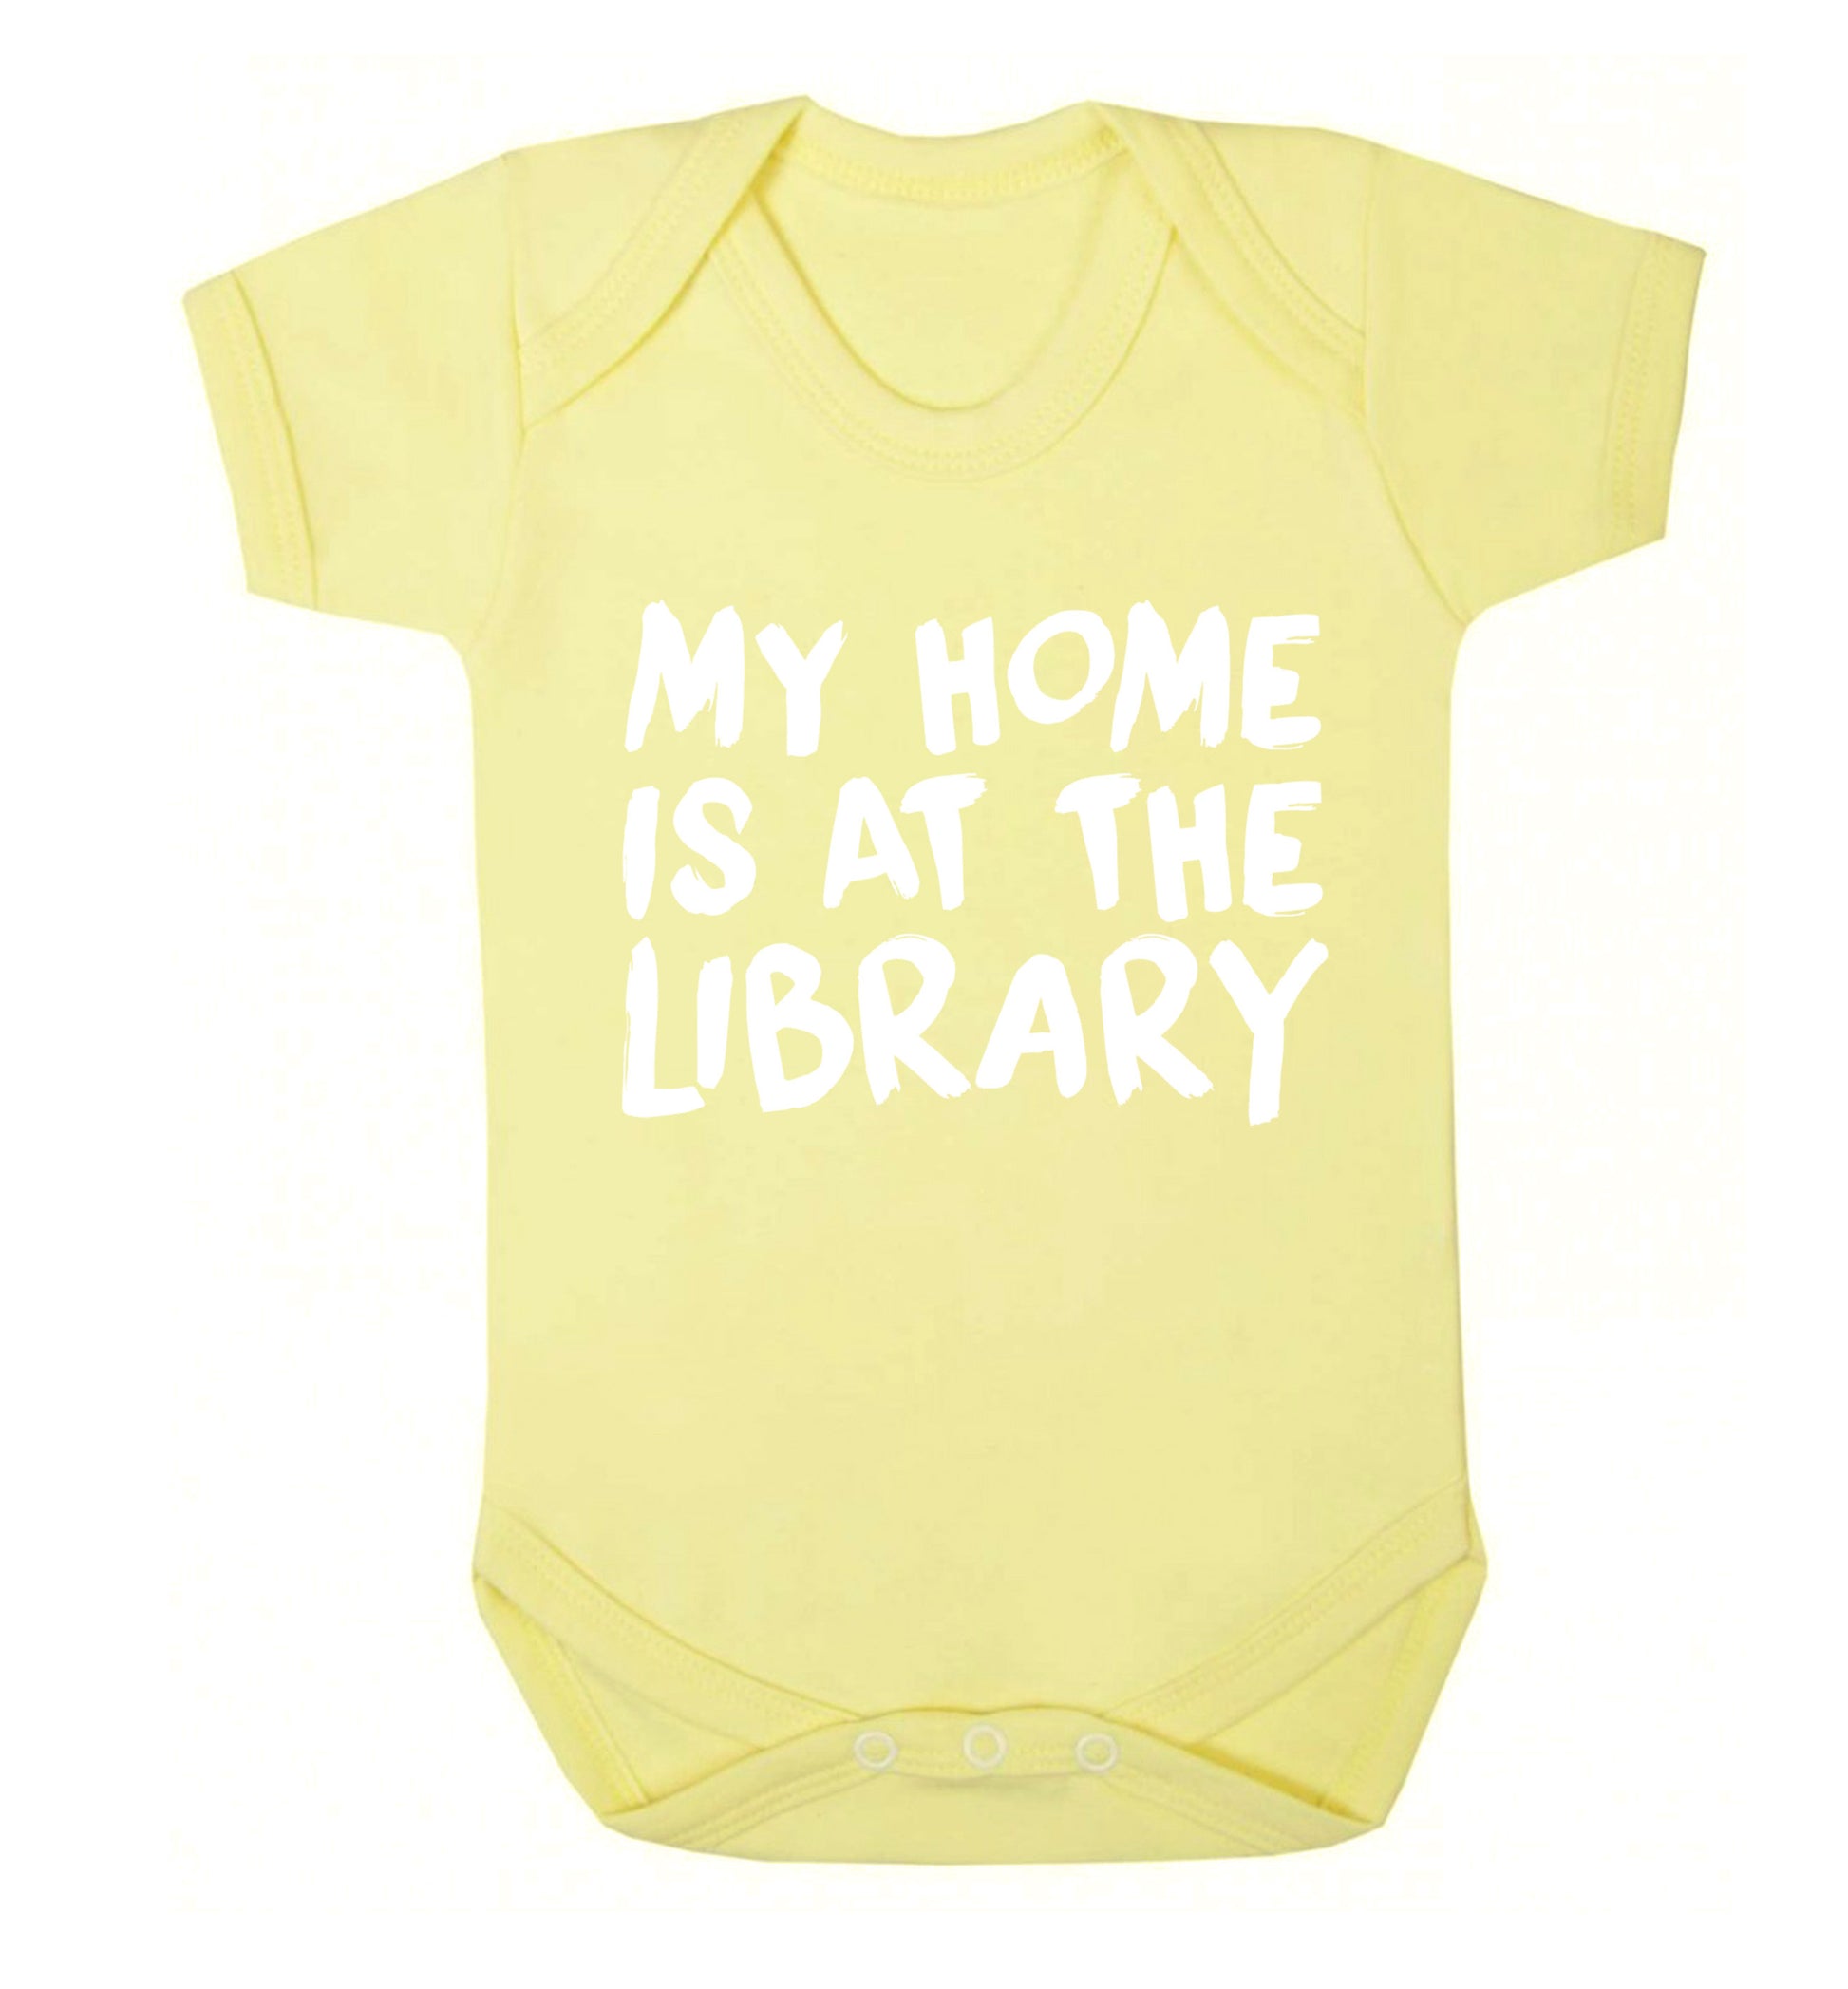 My home is at the library Baby Vest pale yellow 18-24 months